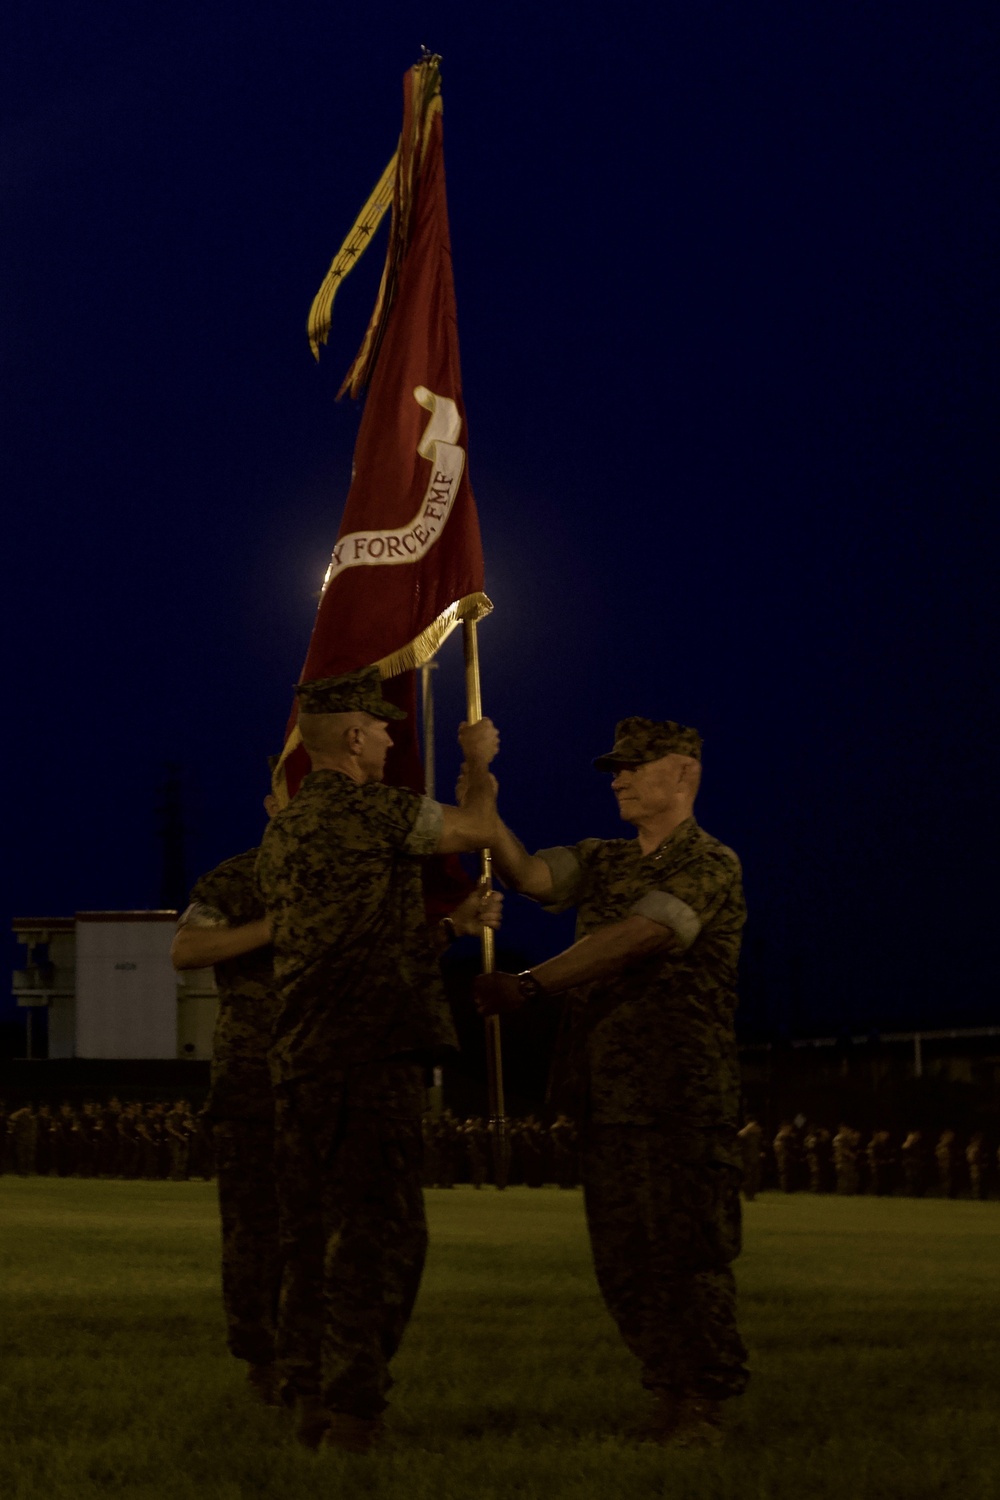 III Marine Expeditionary Force Commanding General Change of Command